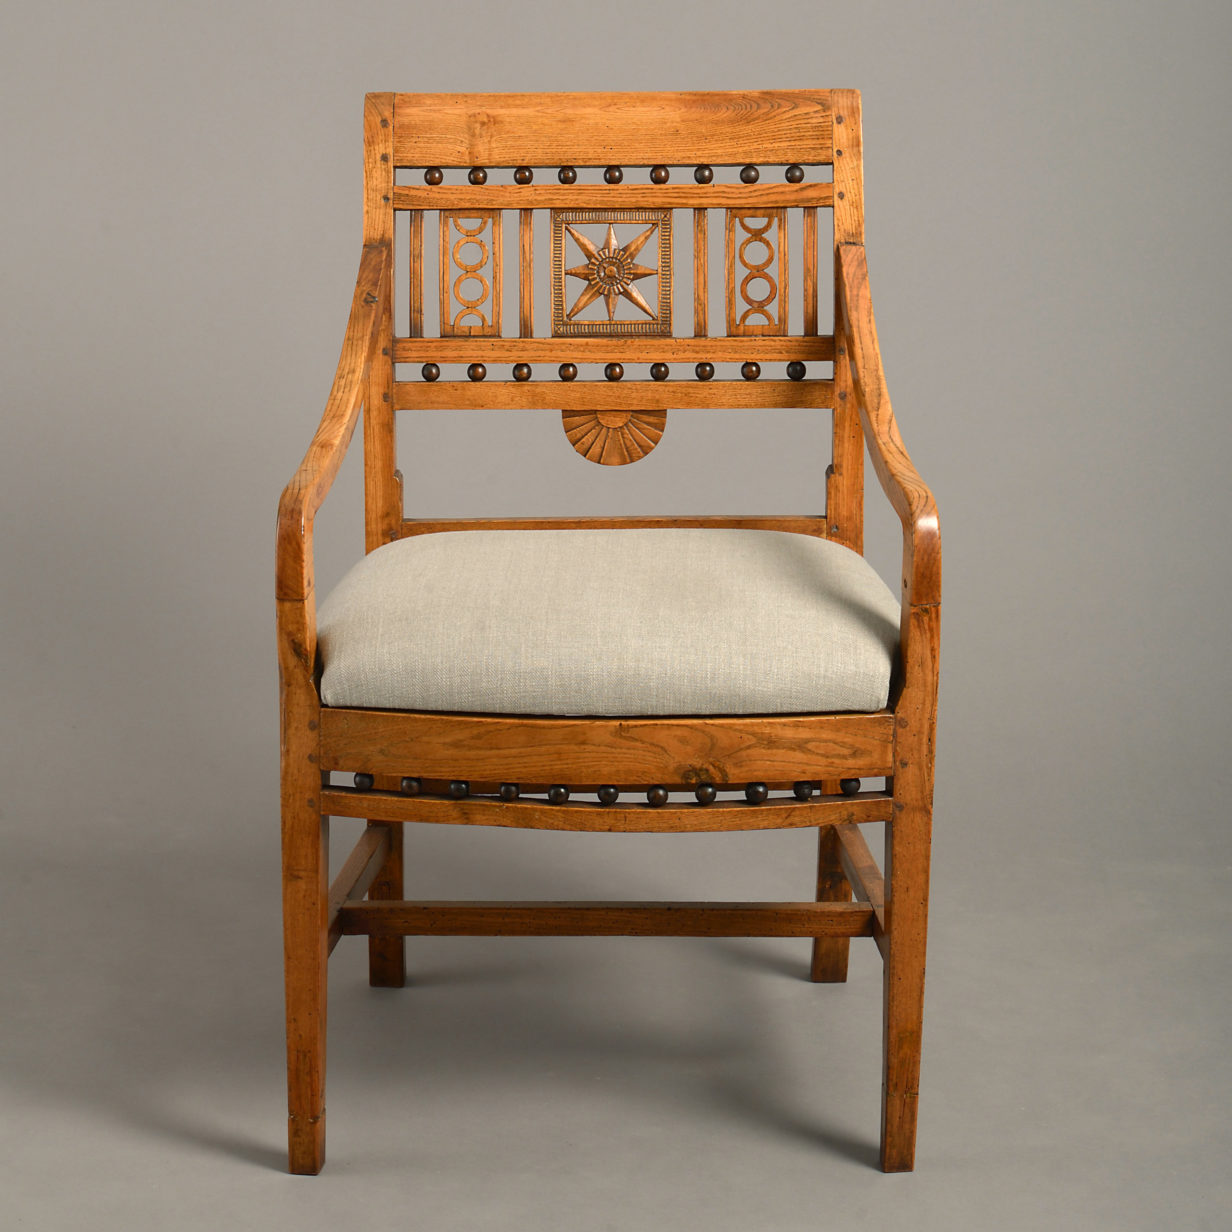 A late 18th century directoire period elm open armchair